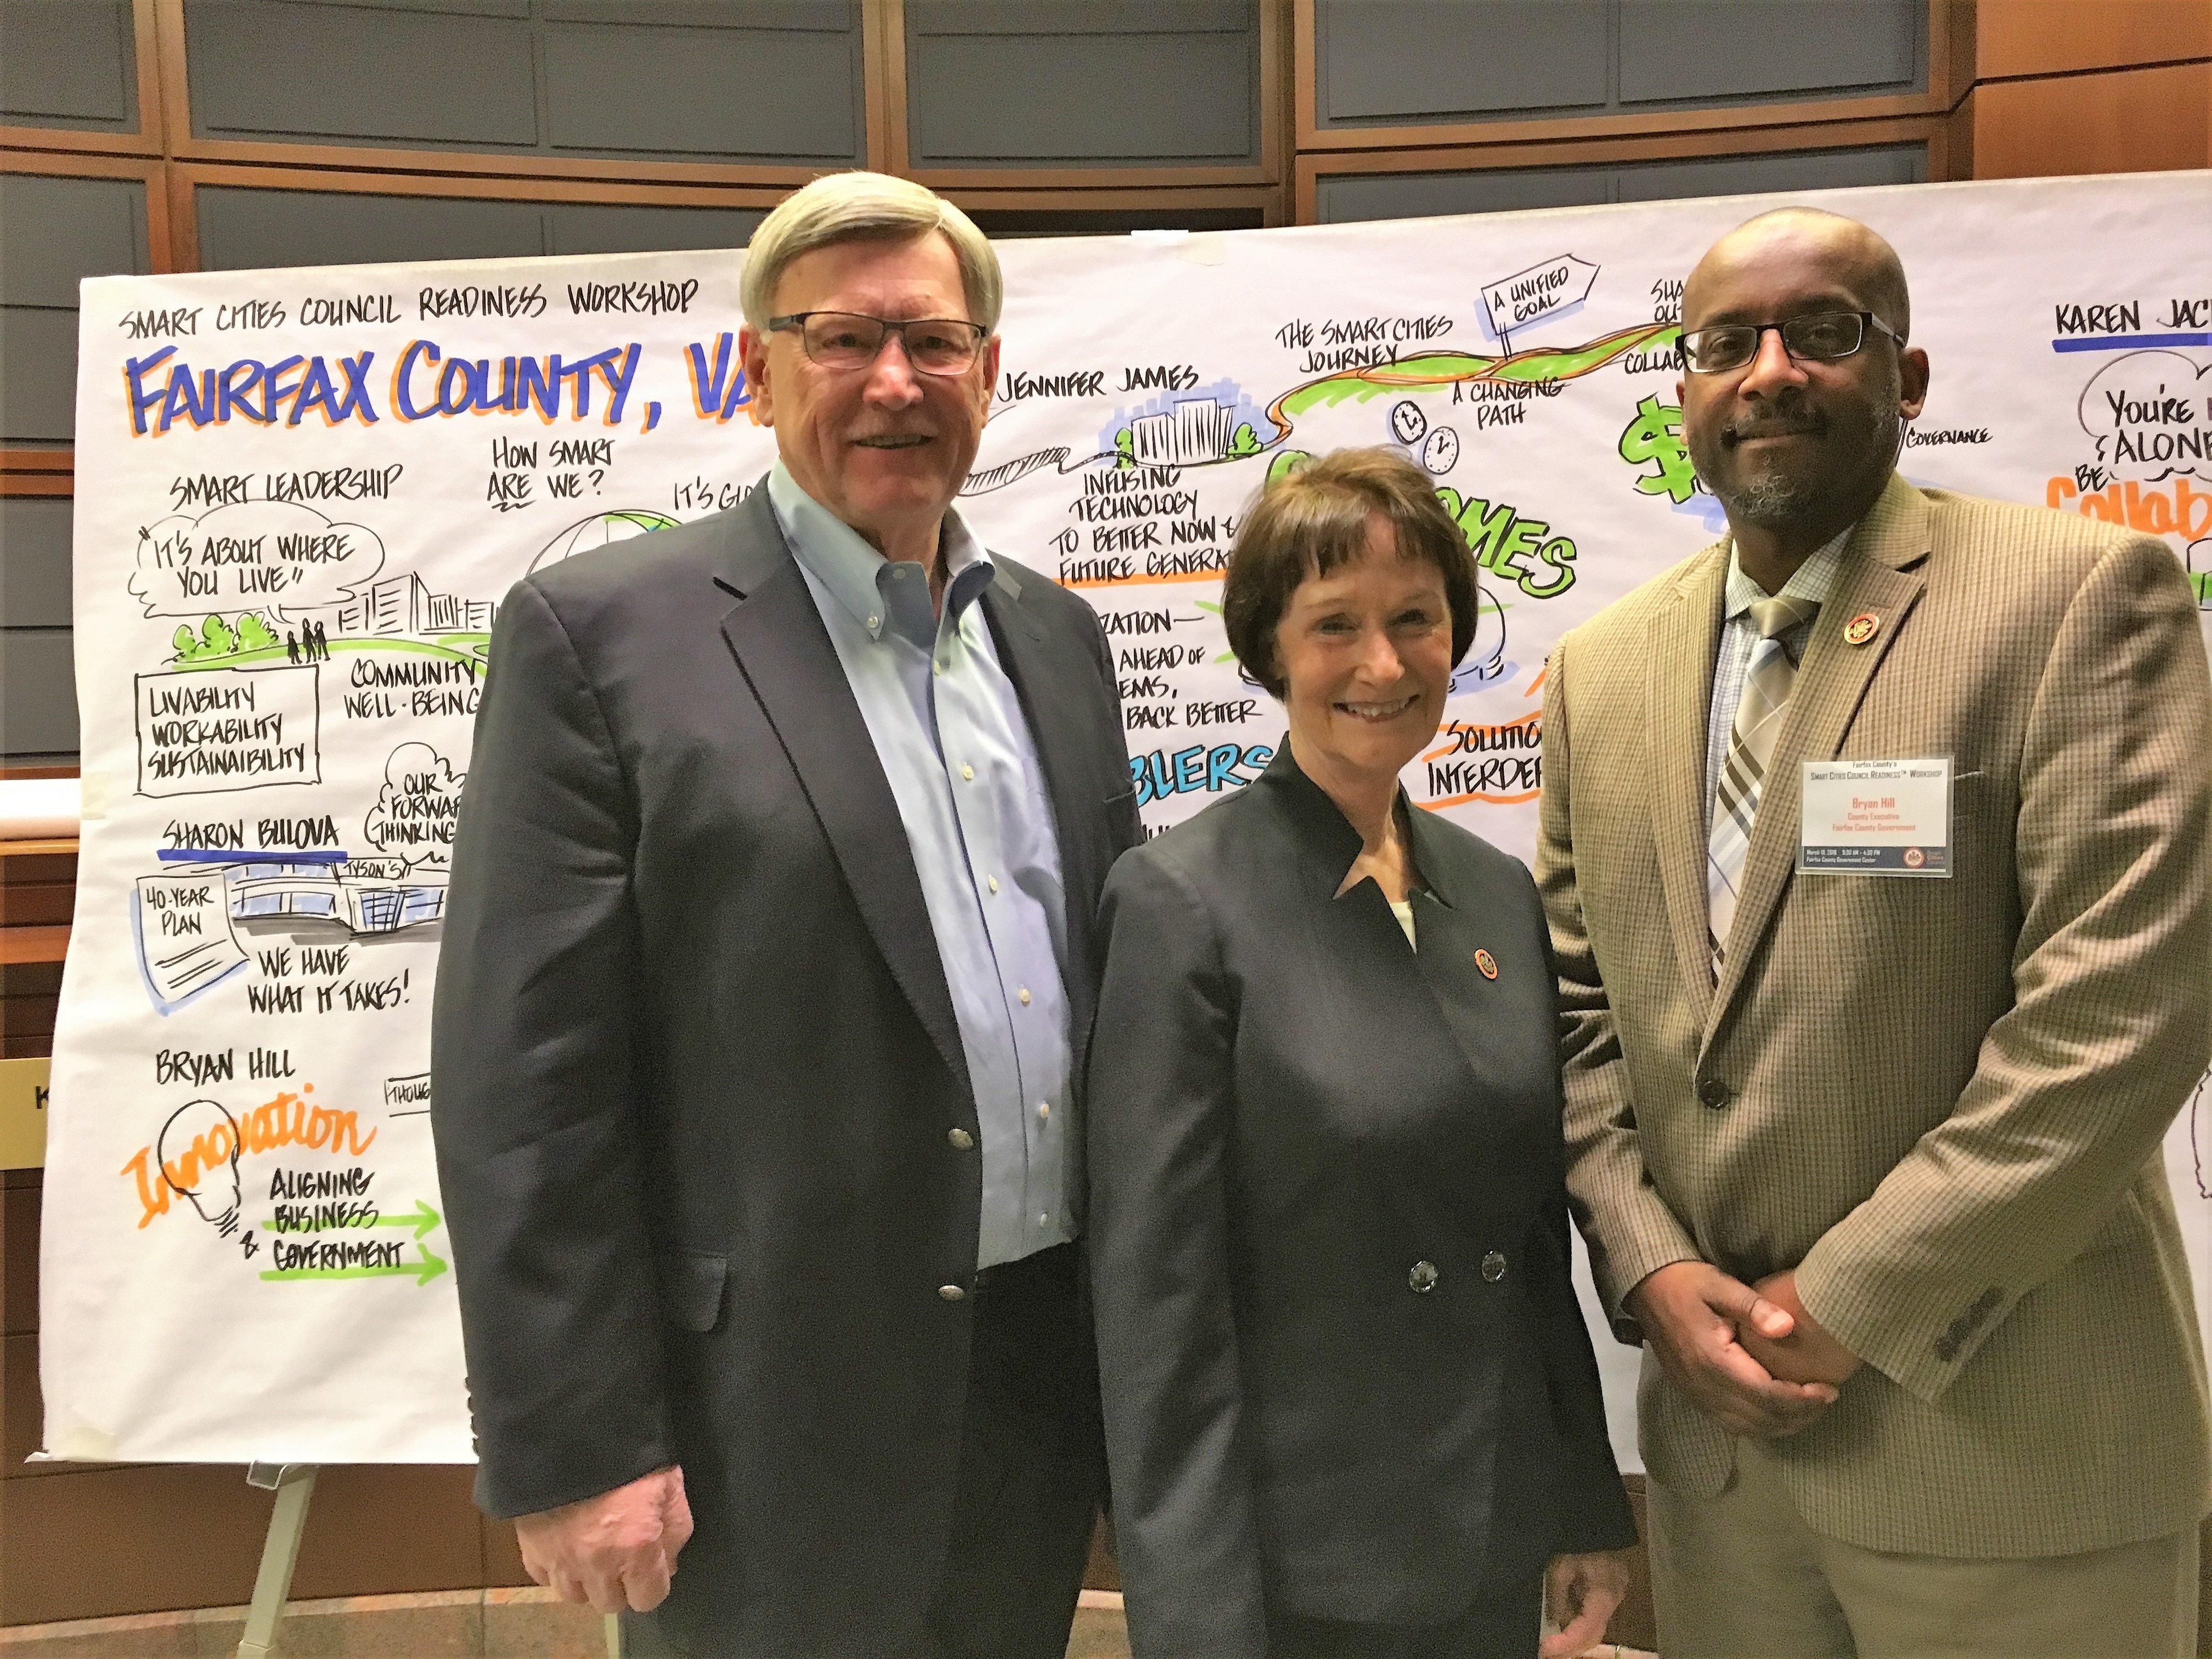 County leaders at the Smart Cities Readiness Workshop.